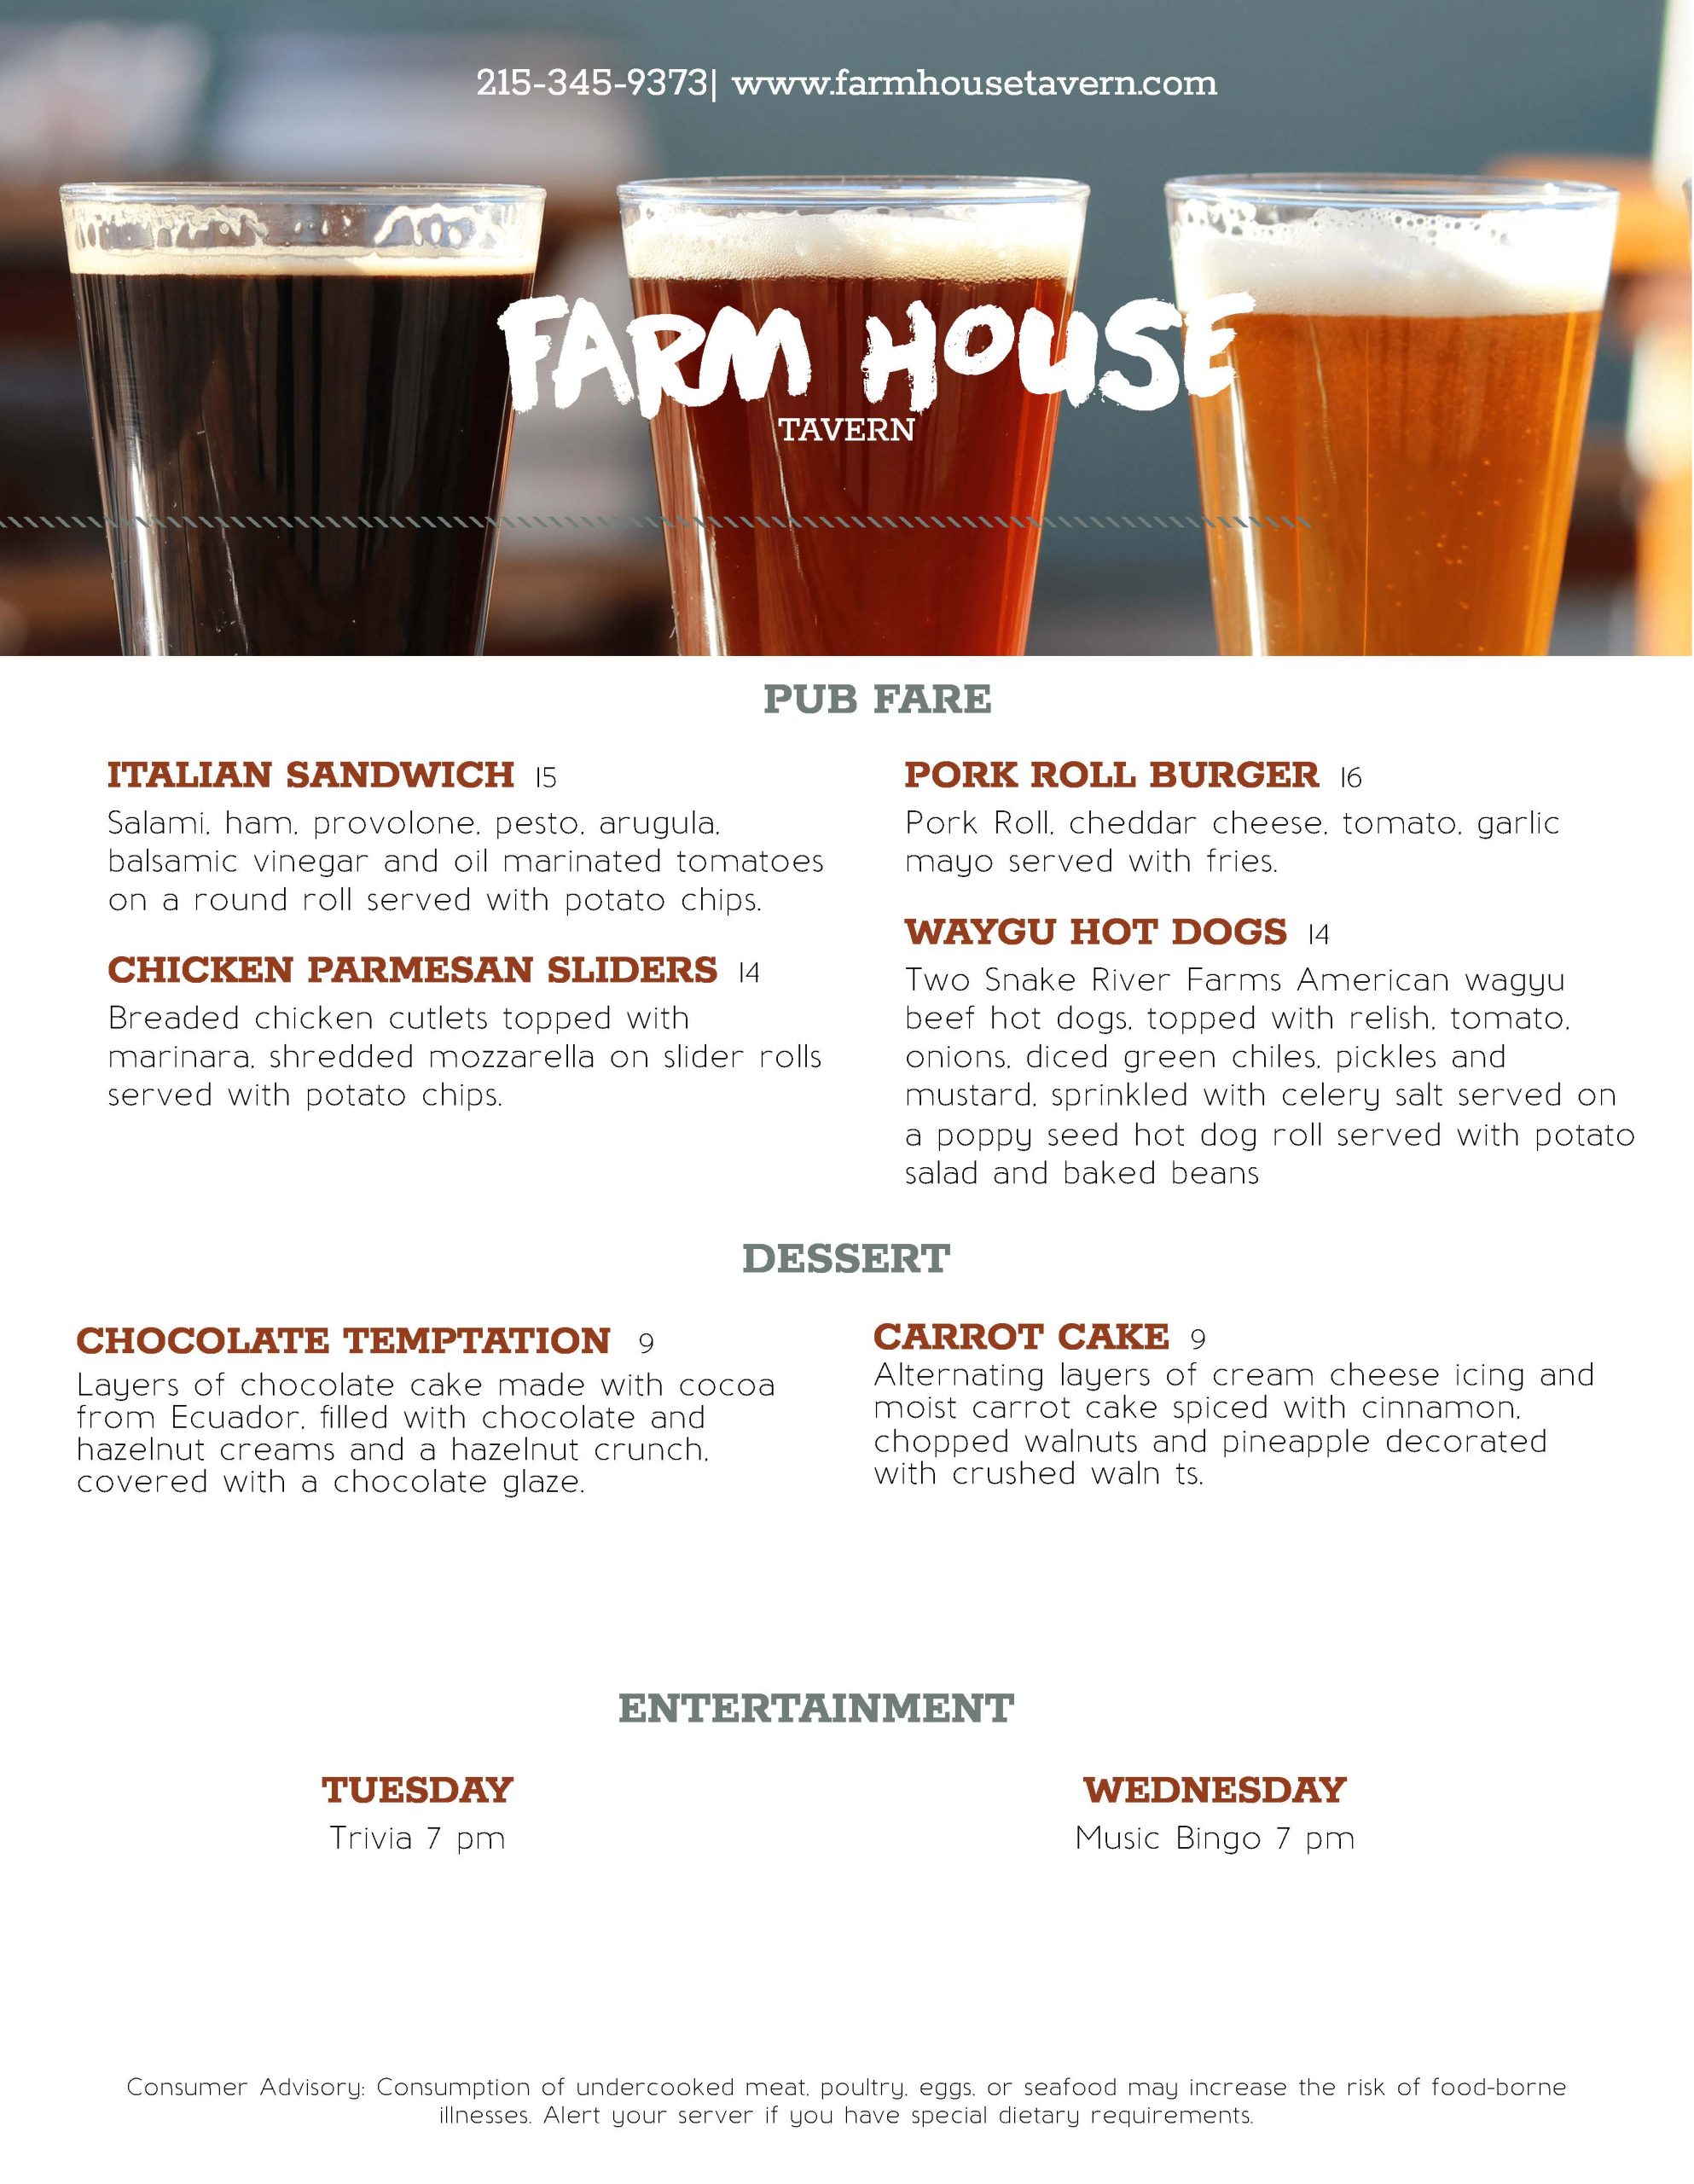 A menu for 'Farm House Tavern' featuring items like Italian Sandwich and Pork Roll Burger under 'Pub Fare', Chocolate Temptation and Carrot Cake under 'Dessert', with weekly entertainment listed.